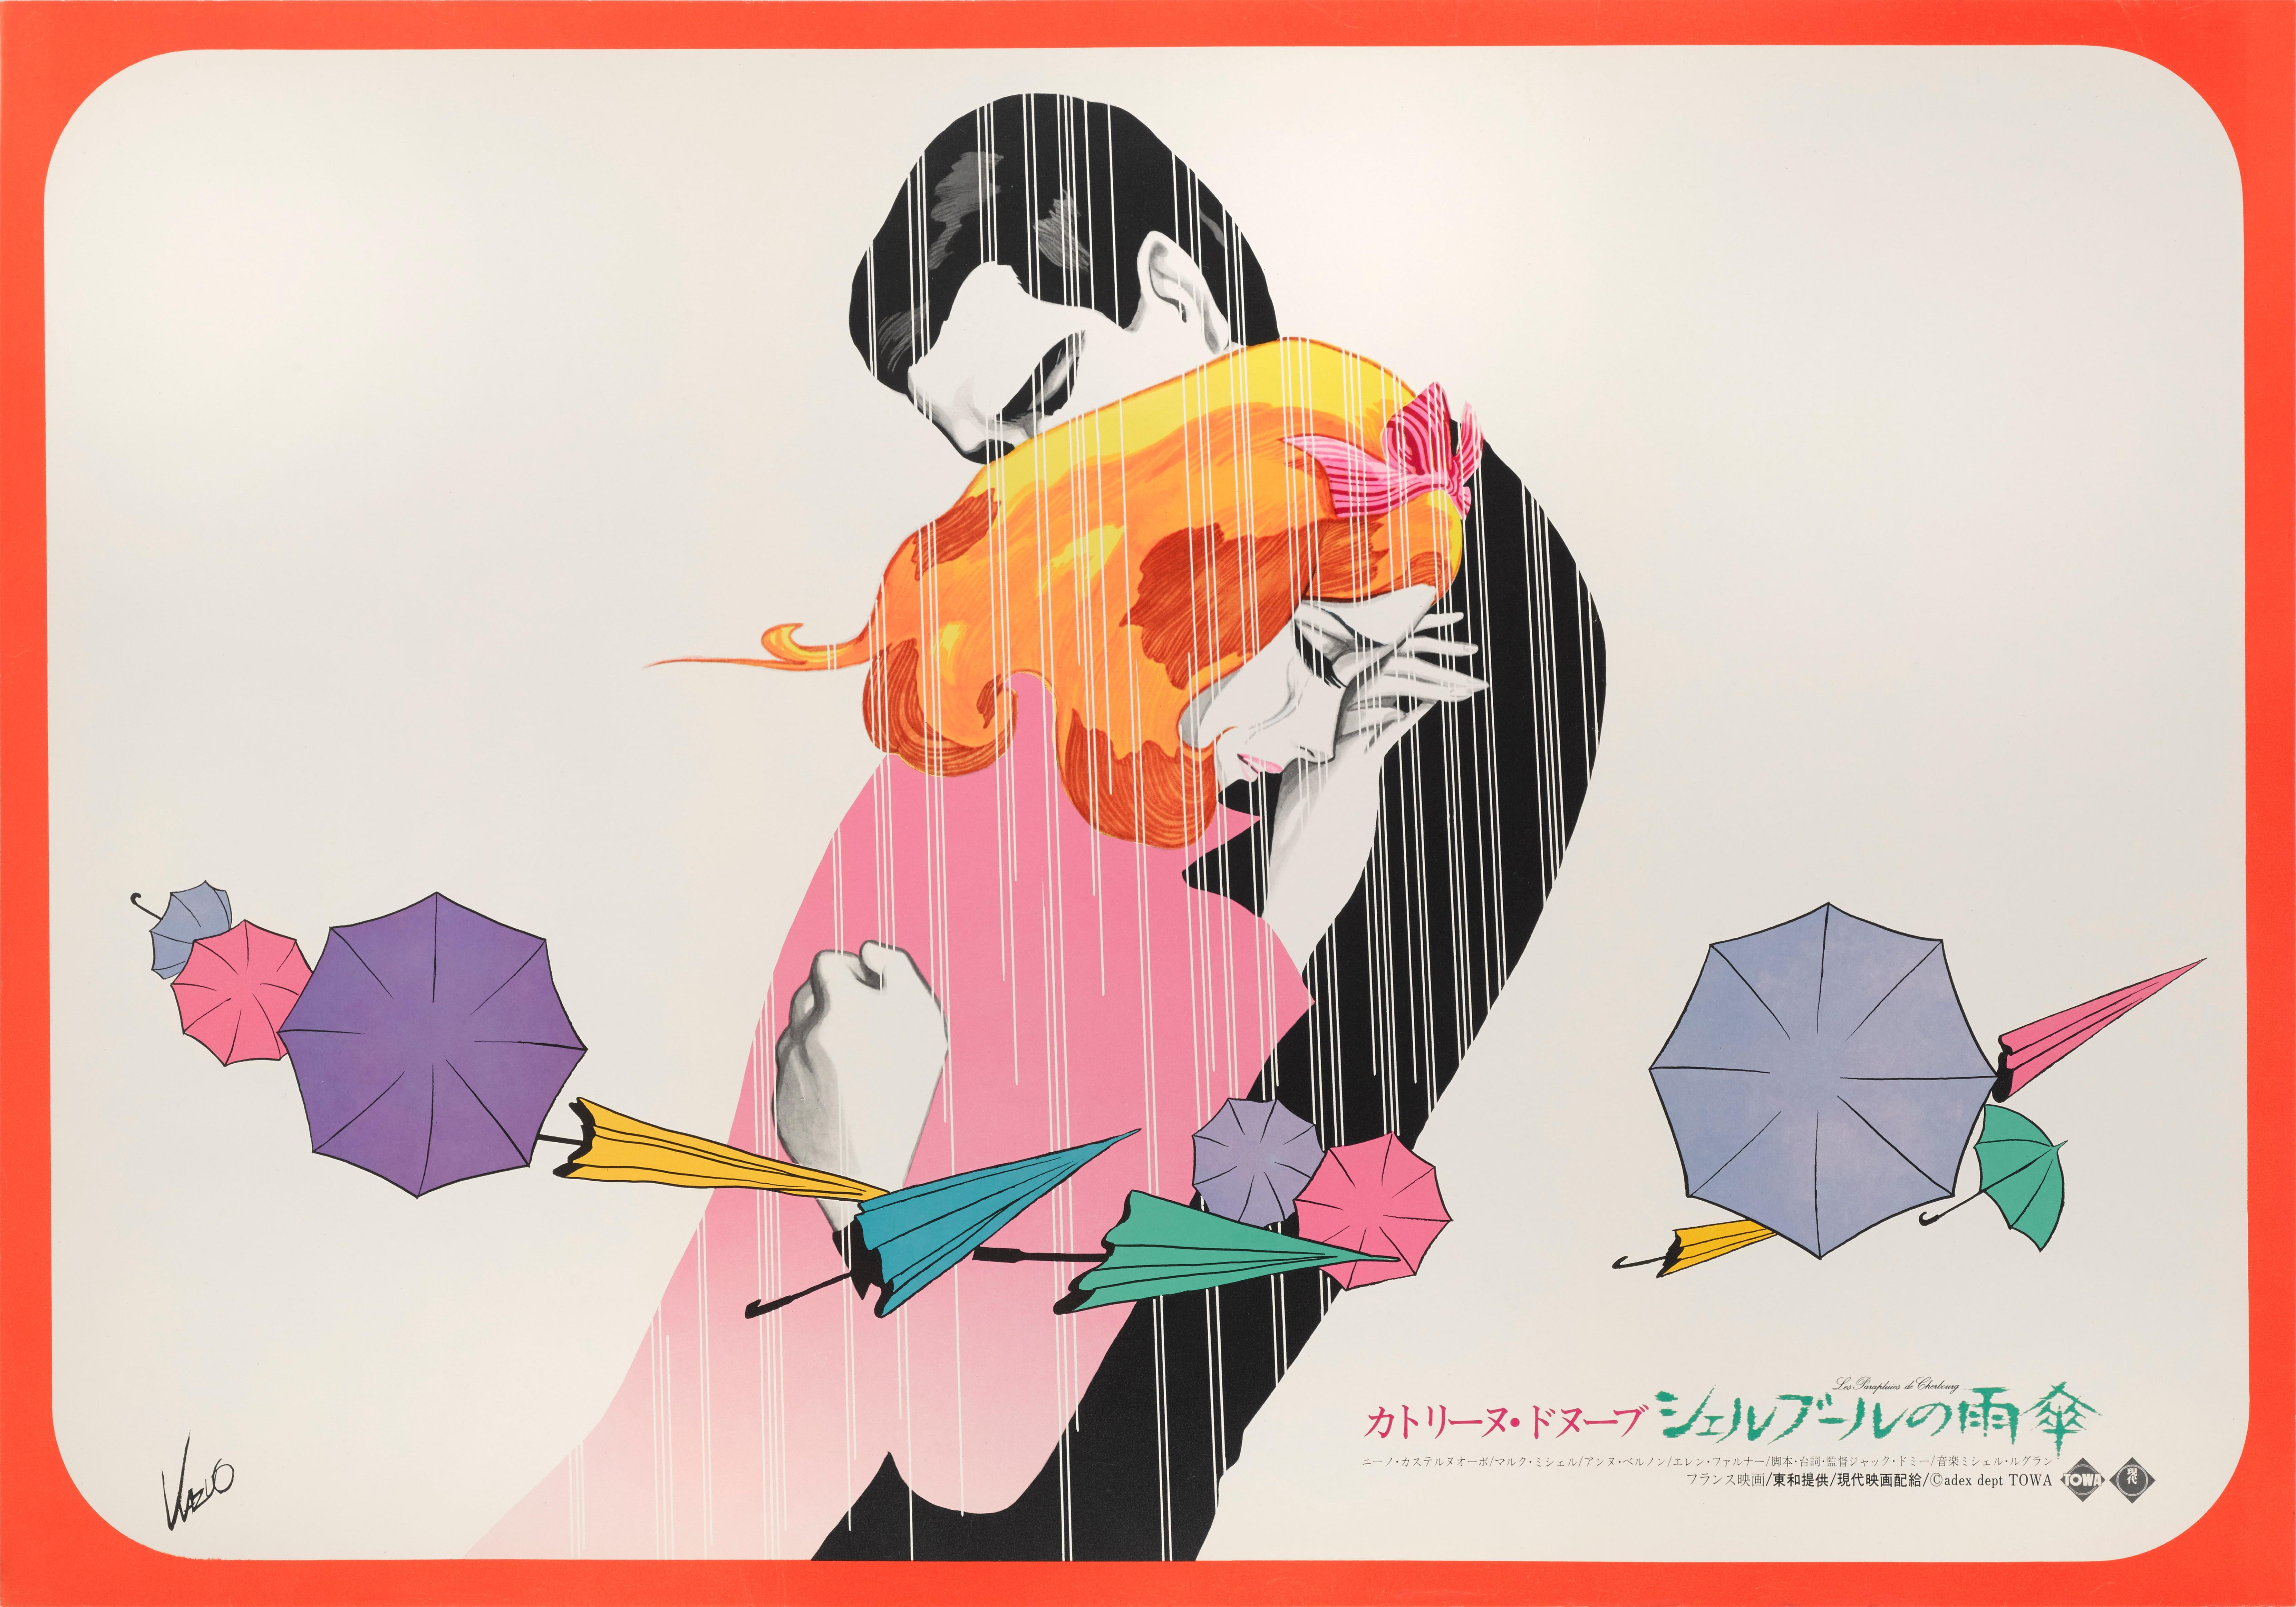 Original Japanese film poster from the Classic 1964 French New Wave film starring Catherine Deneuve and Nino Castelnuovo.
This film was directed by Jacques Demy.
The wonderful artwork on this poster is by the Japanese artist Kamimura Kazuo